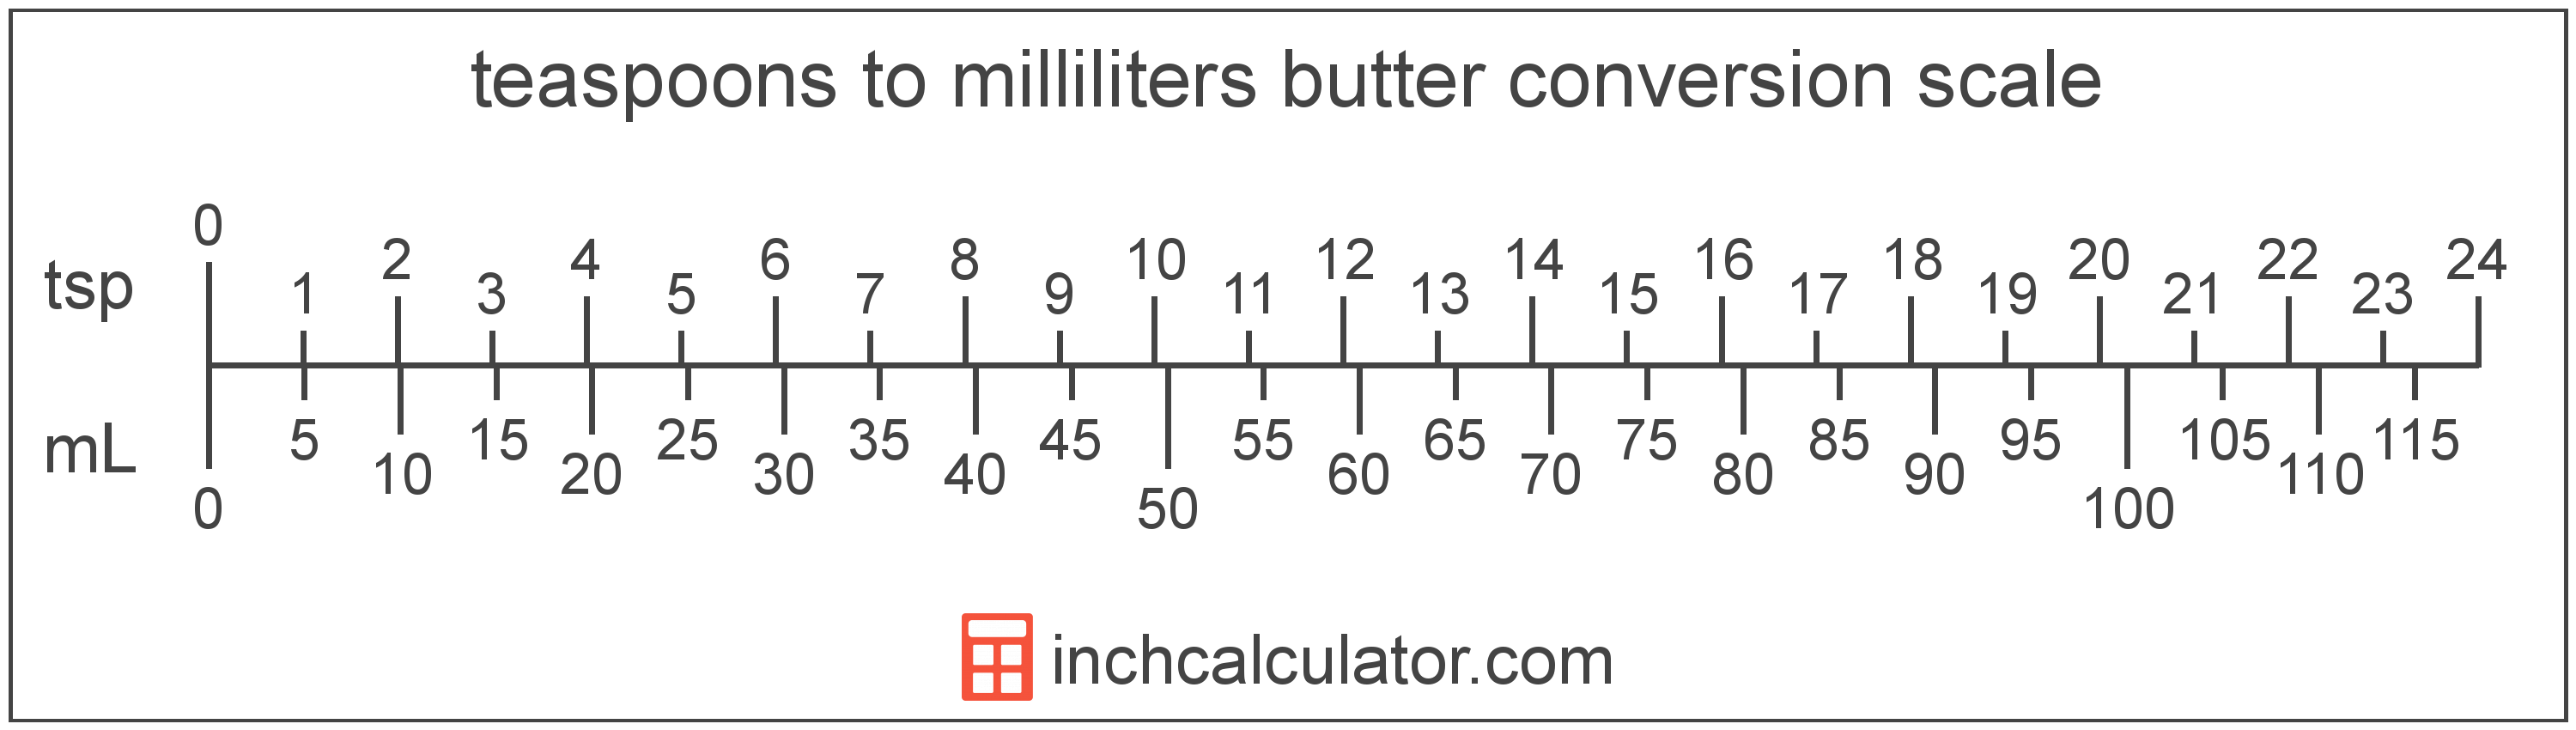 milliliters-of-butter-to-teaspoons-conversion-ml-to-tsp